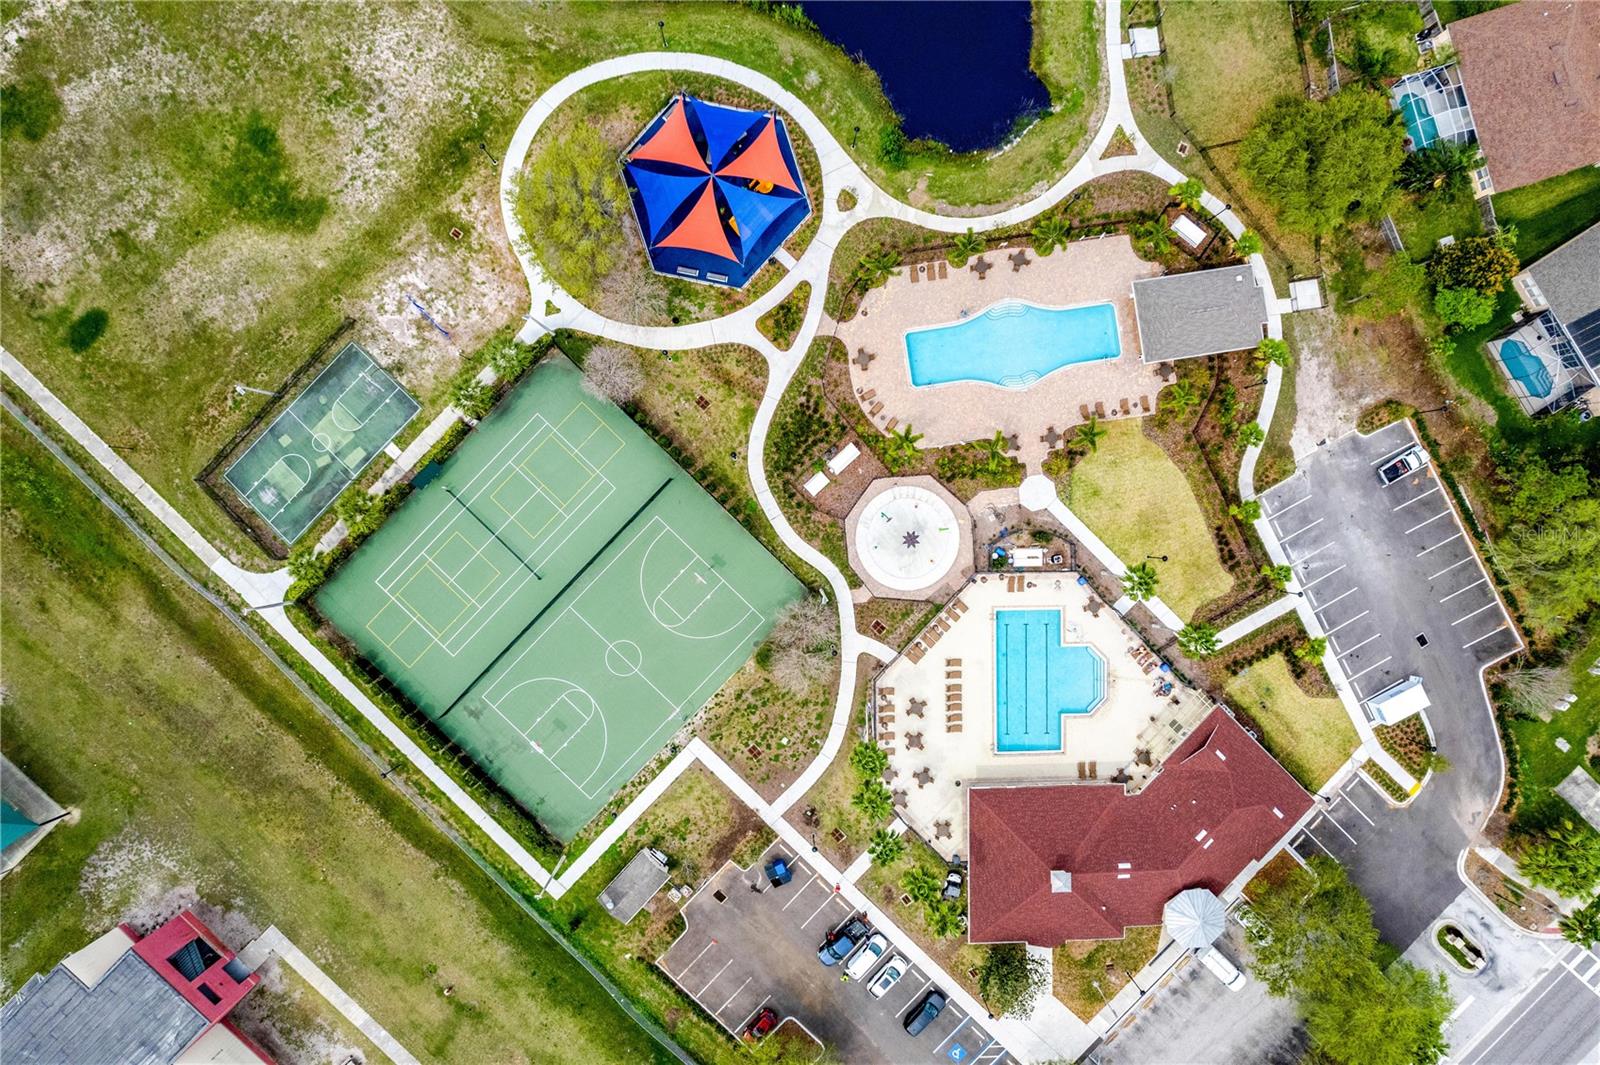 Community clubhouse, two pools, tennis courts, basketball, playground